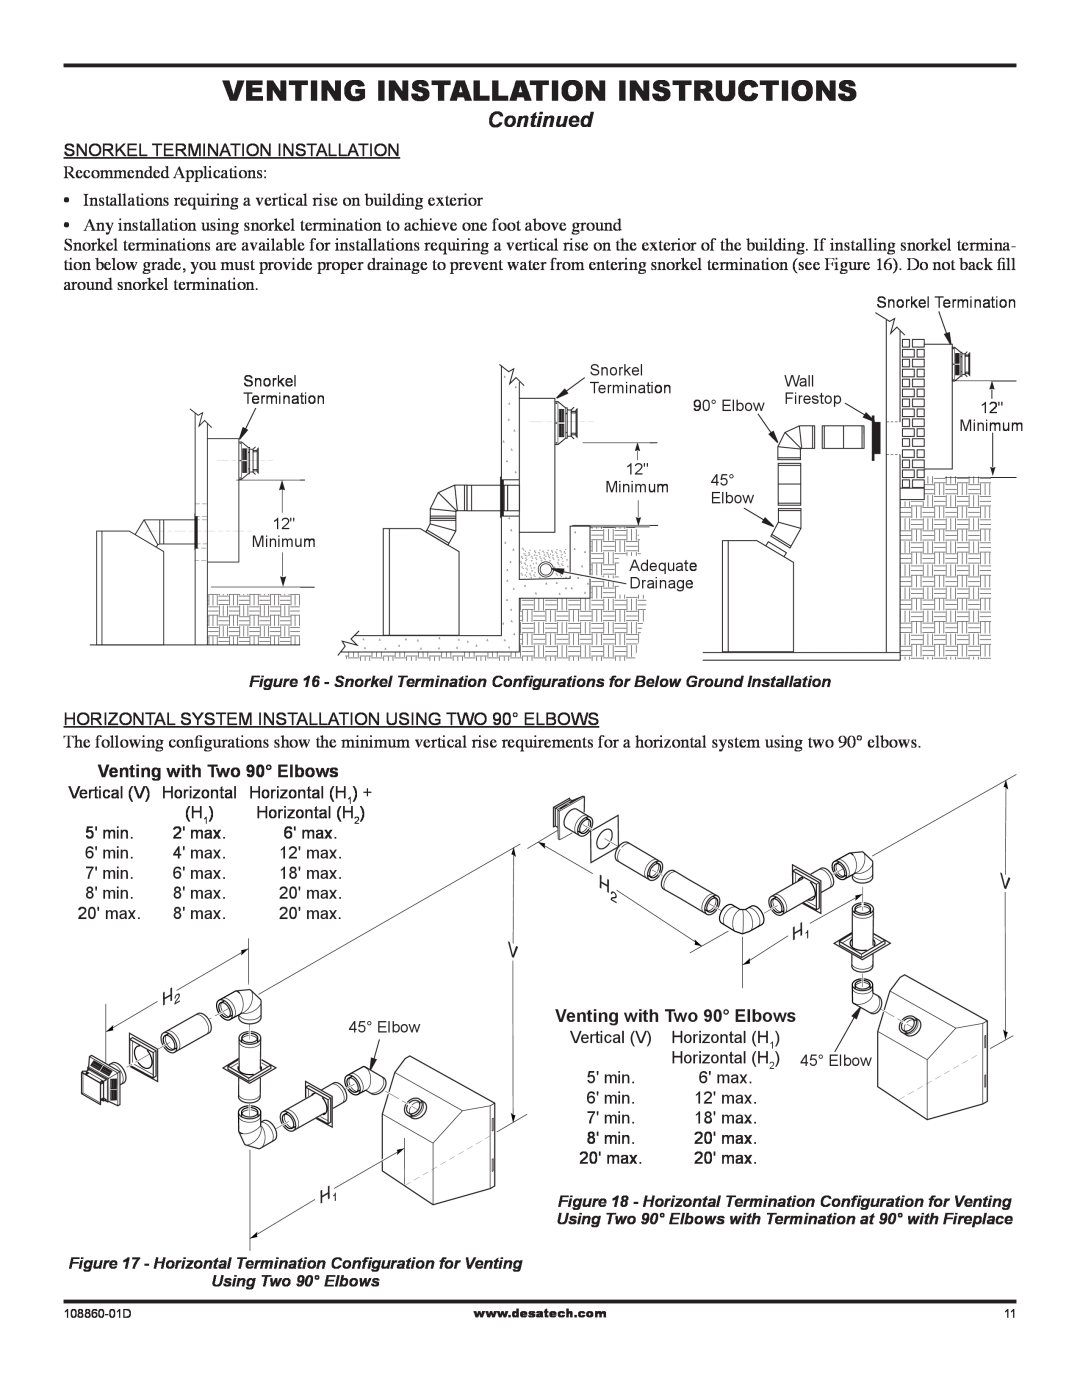 Desa (V)T32EN Venting Installation instructions, Continued, Recommended Applications, Venting with Two 90 Elbows 